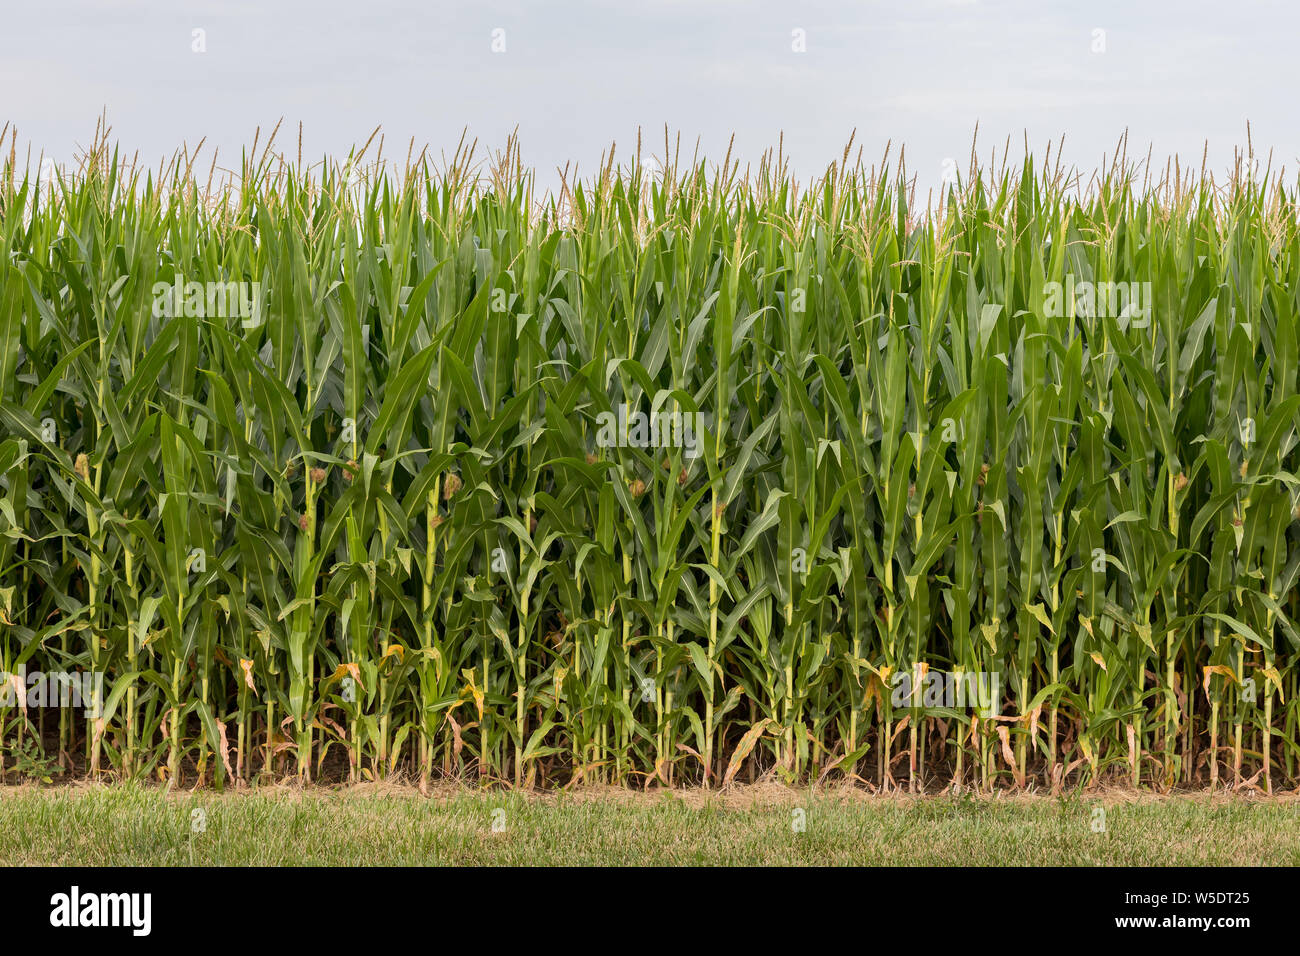 Corn field with tassels, silk, and ears of corn on healthy corn stalks in mid summer Stock Photo